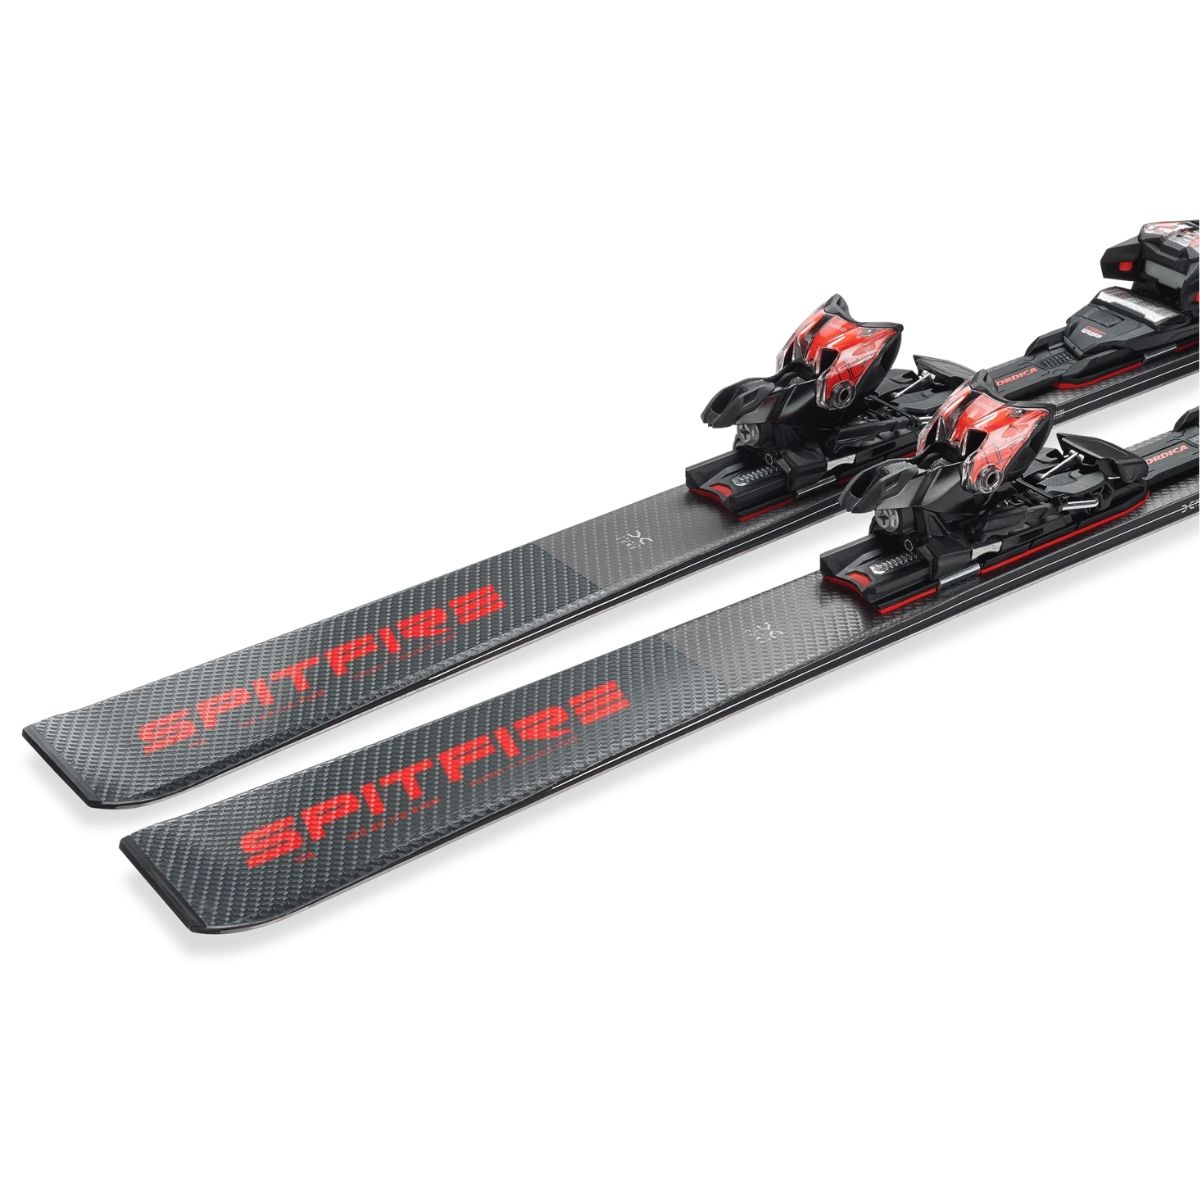 Nordica Skiset Spitfire DC 80 Pro FDT + XCELL grey red Art. 0A3531LB